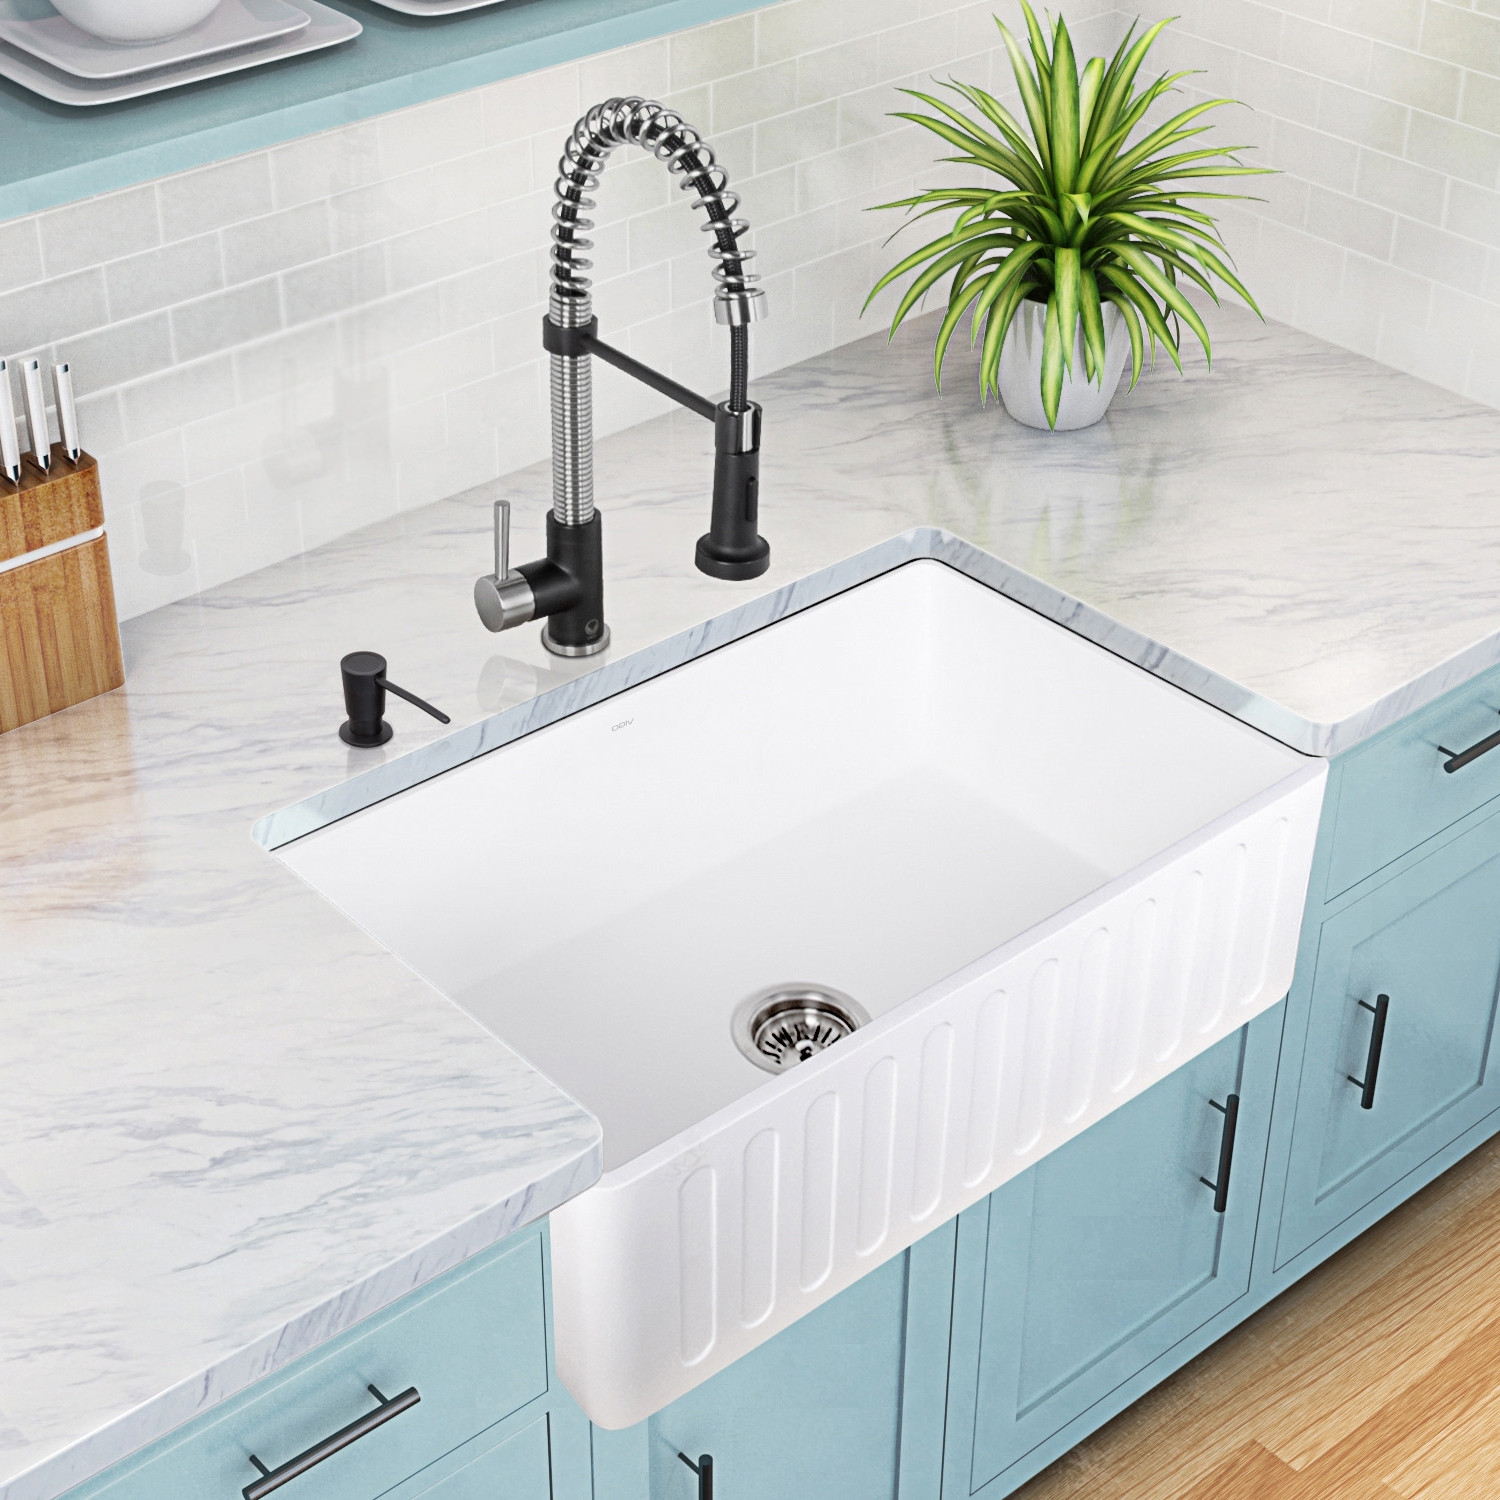 White Kitchen Faucets Home Depot
 Interior Alluring Farmhouse Kitchen Sink For Stunning